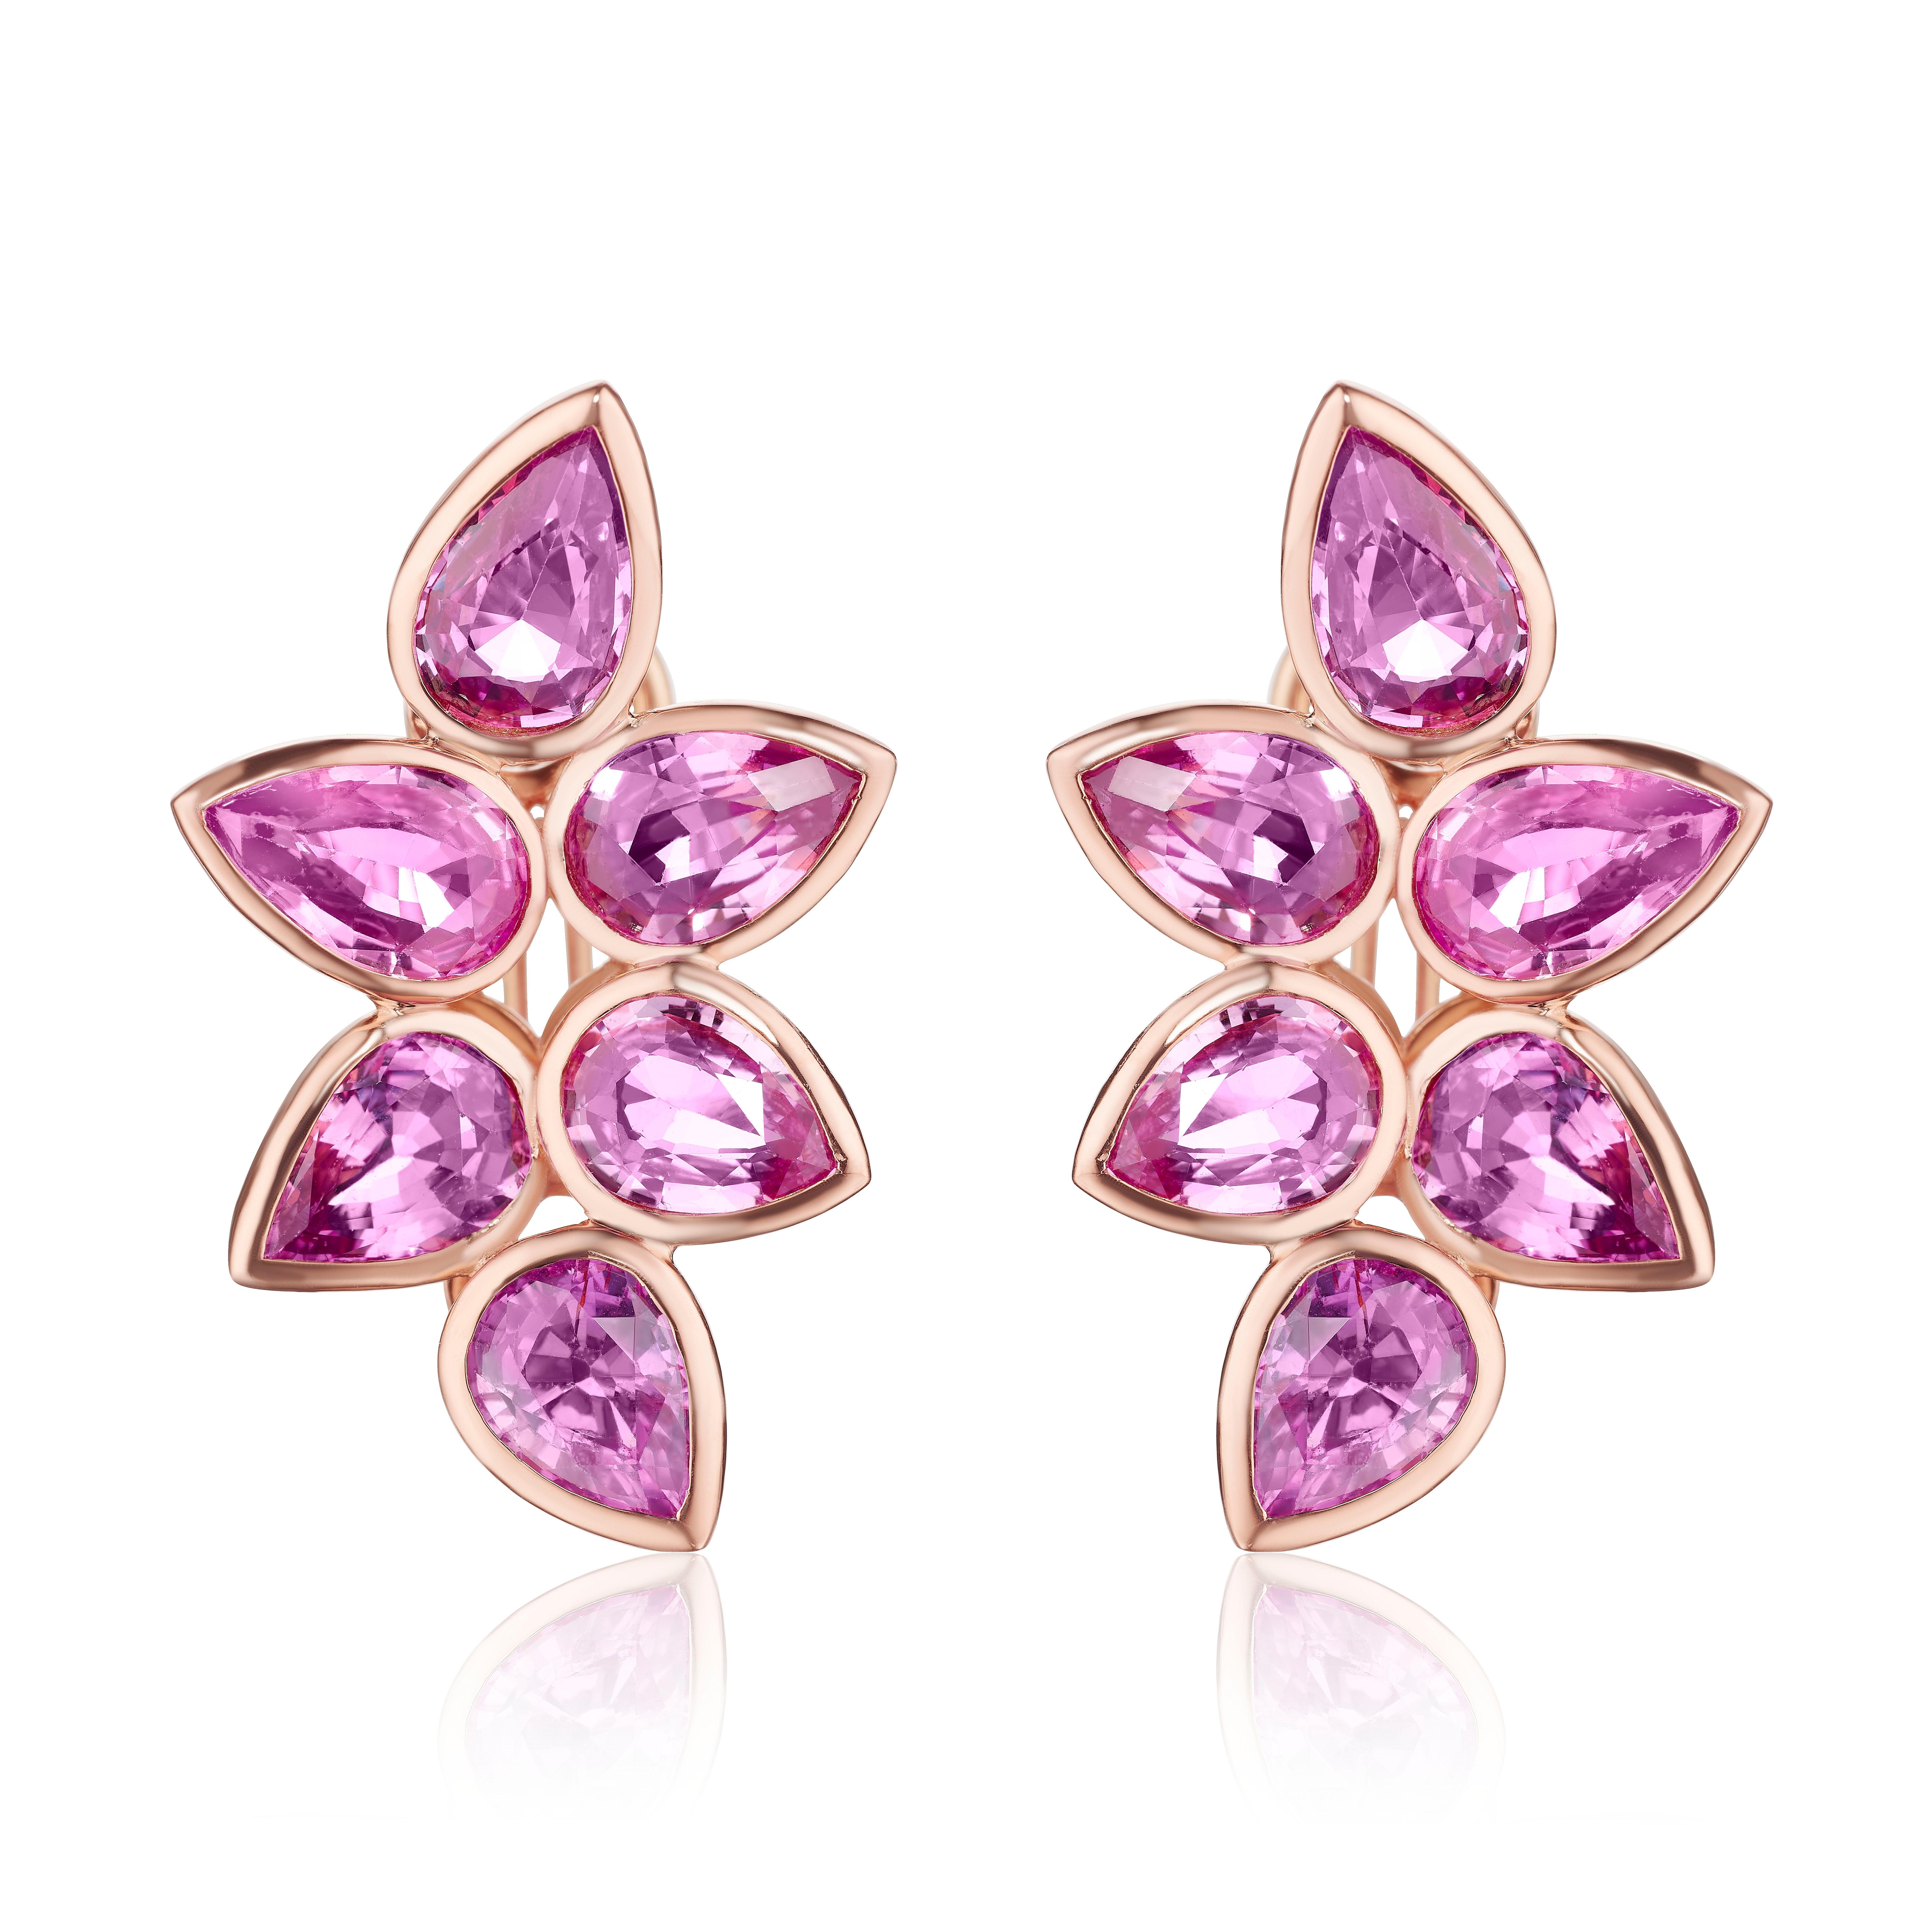 Pear Cut 15.52 Carats Pear Shaped Pink Sapphires Cluster Earrings For Sale